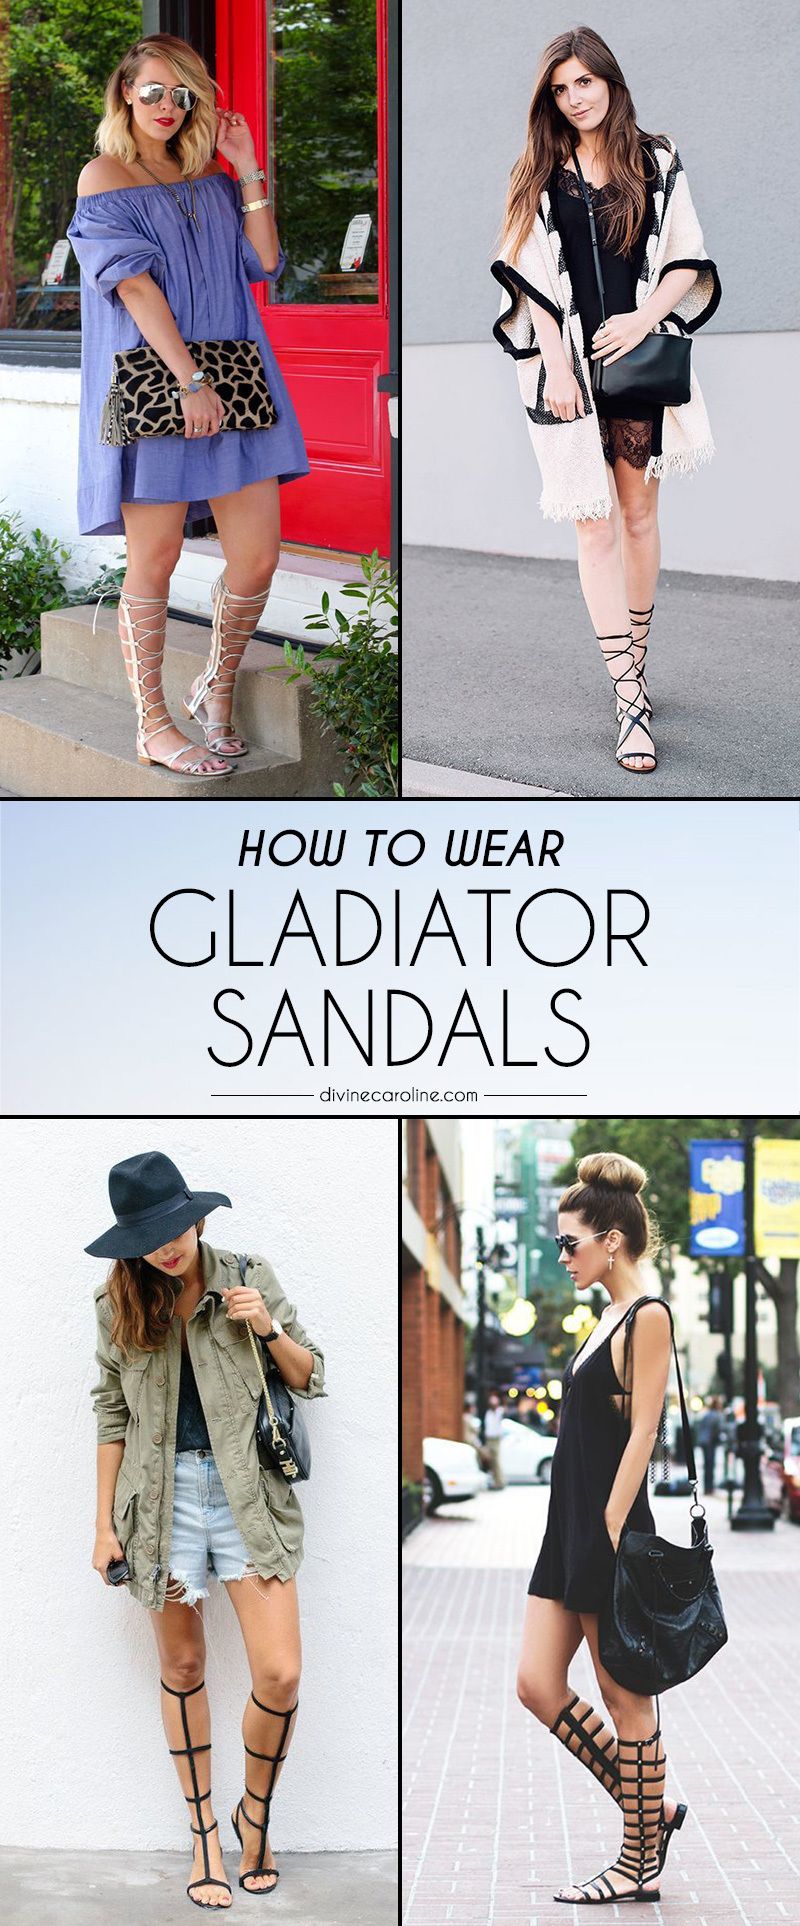 How to Wear Gladiator Sandals: The Summer Must-Have